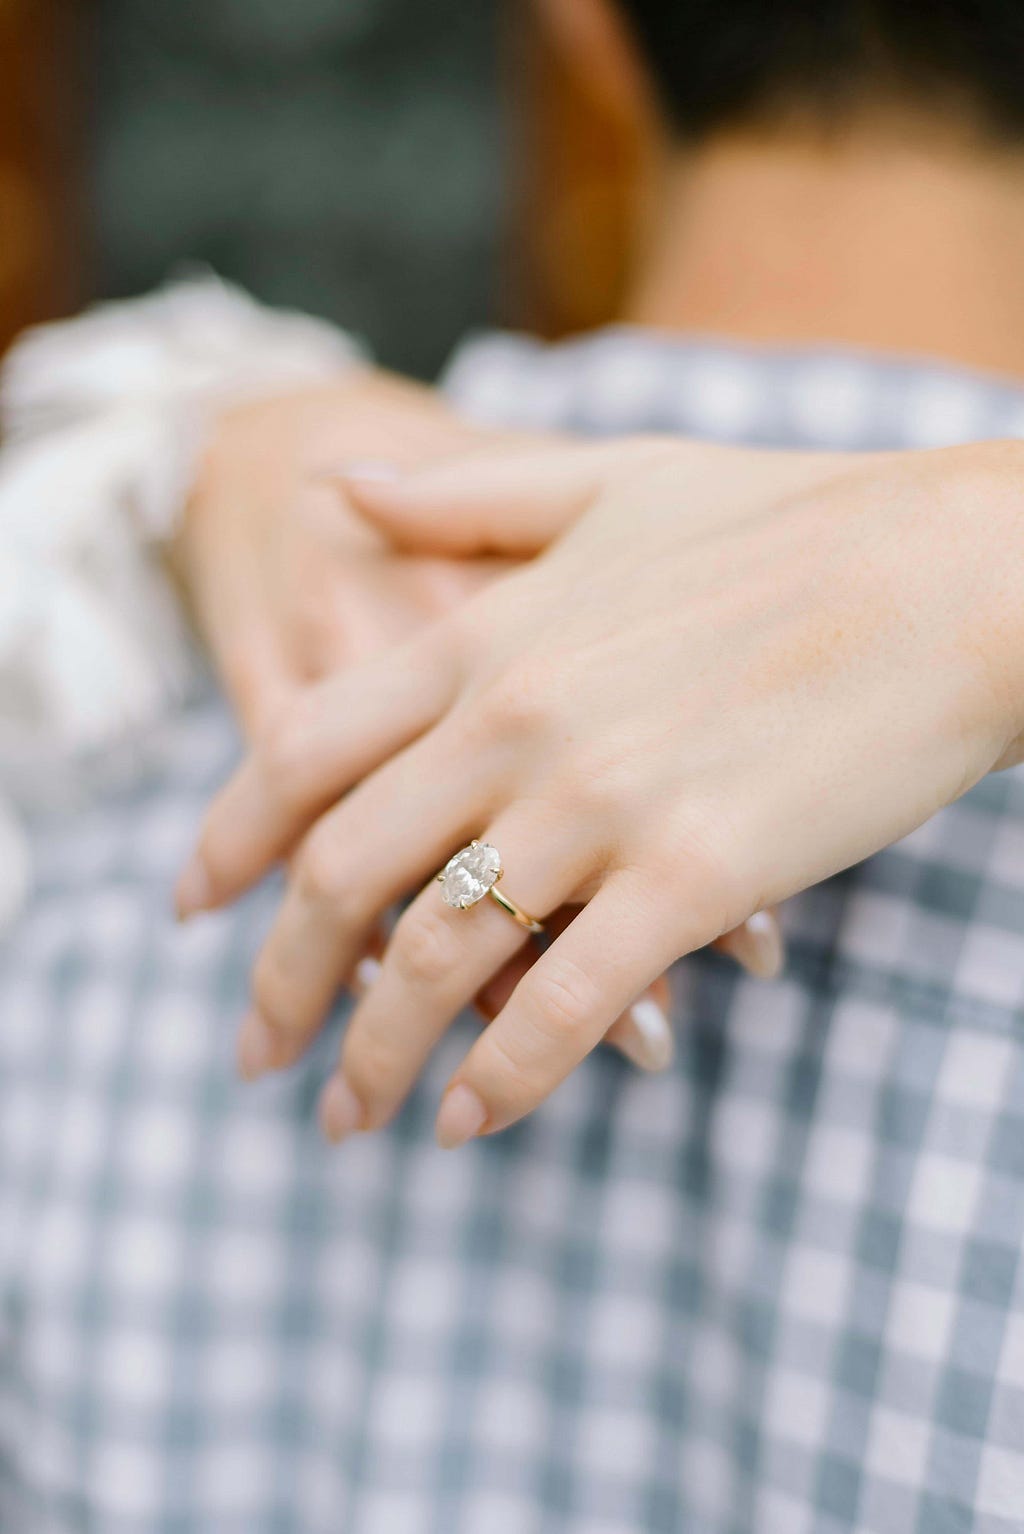 A women’s hands wrapped around her hudbands neck showcasing a beautiful diamond engagement ring.